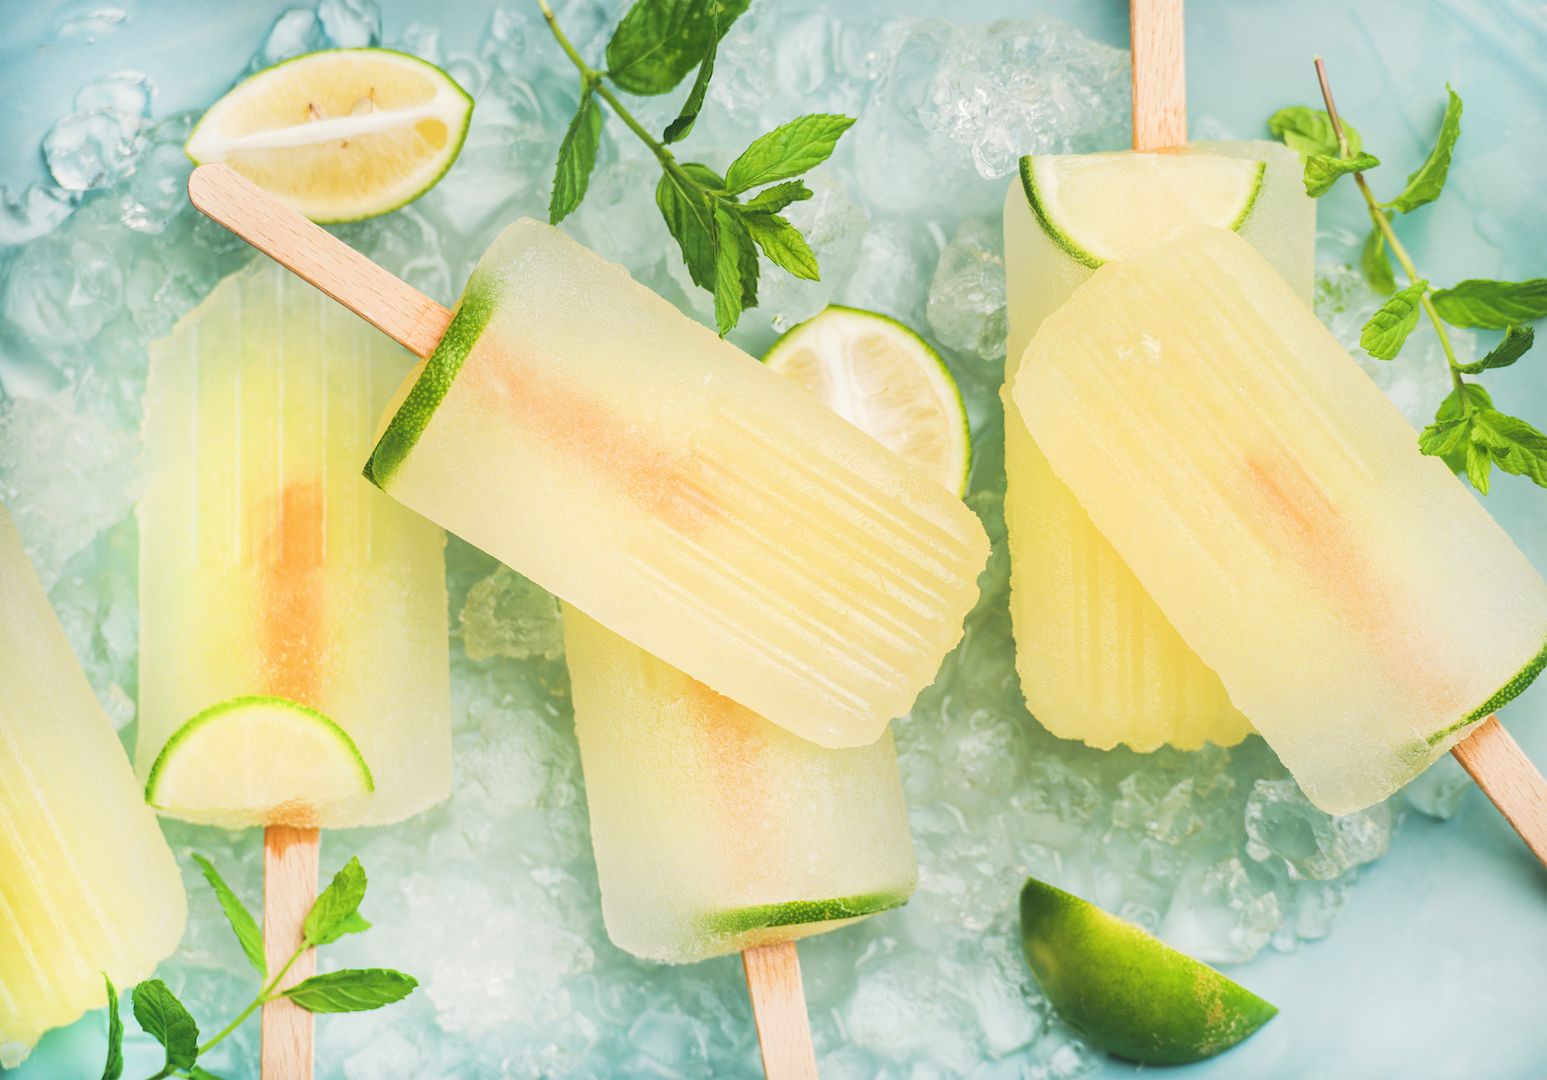 summer-lemonade-popsicles-with-lime-and-chipped-ic-2022-02-02-05-07-42-utc-3